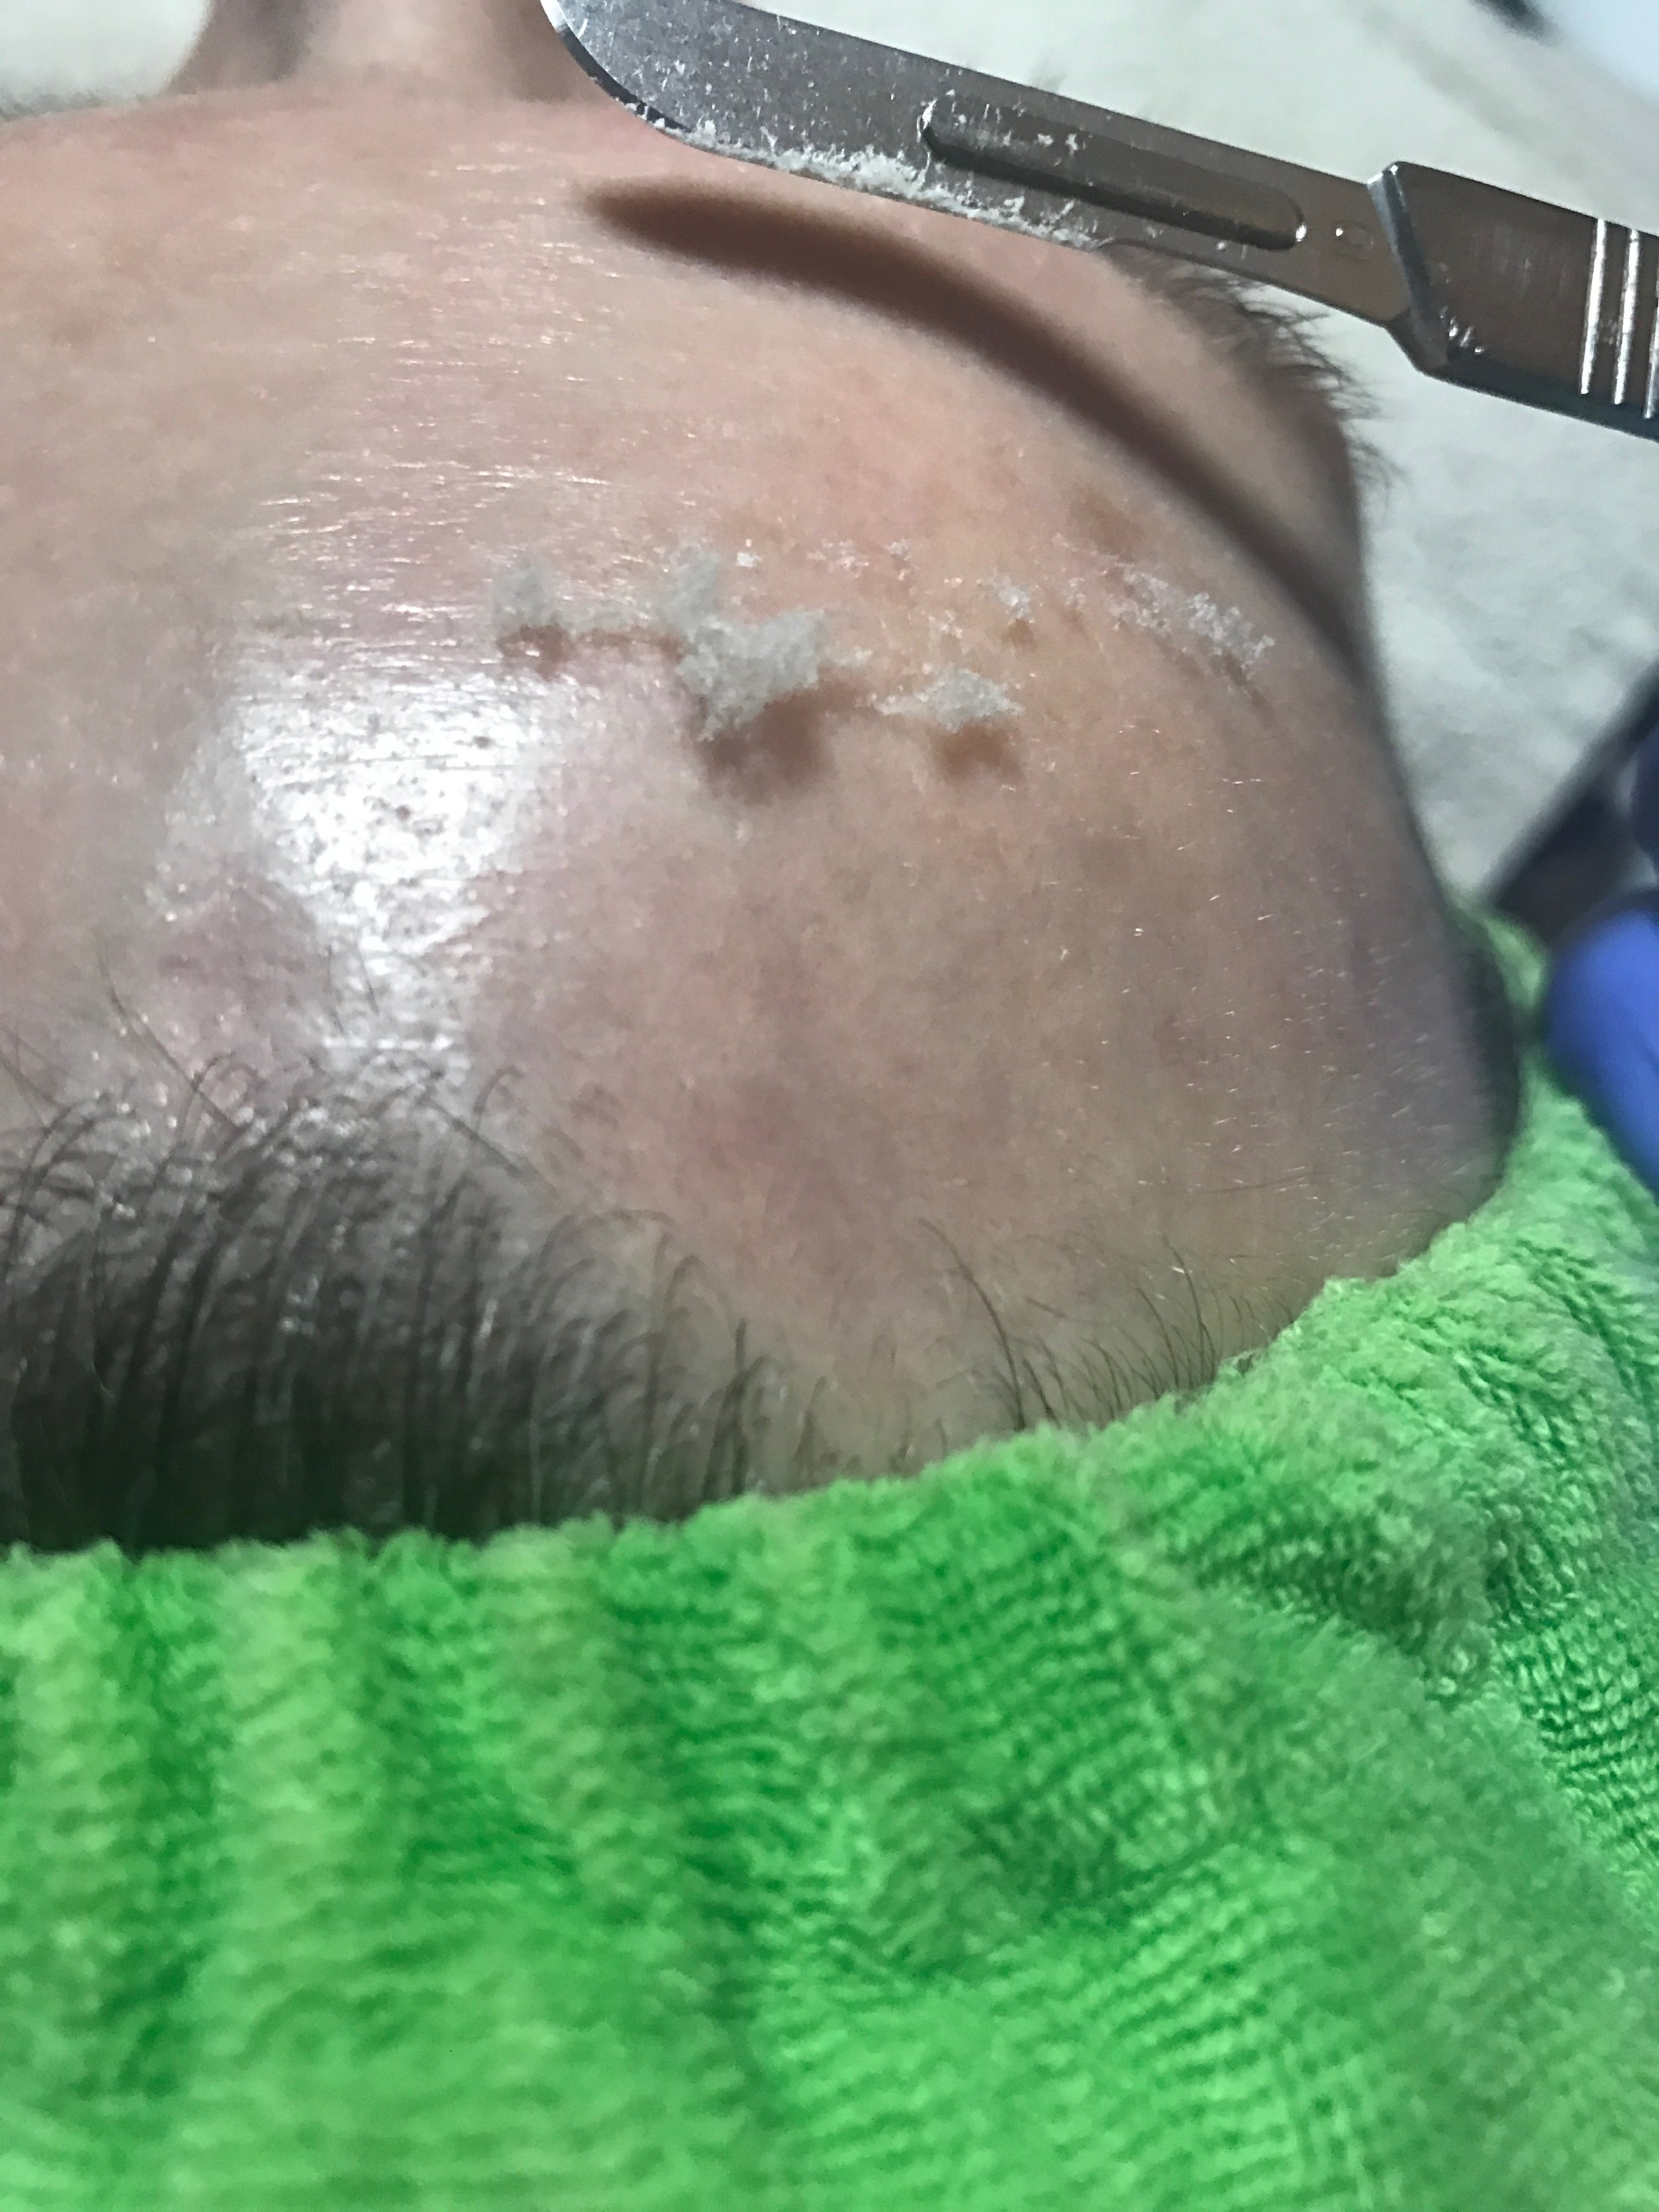 If you're like, "wtf is this?!" and perhaps slightly frightened of that blade - DON'T BE! Focus rather on all that dead skin! Dermaplaning does not hurt, but it does give you a fantastic exfoliation!